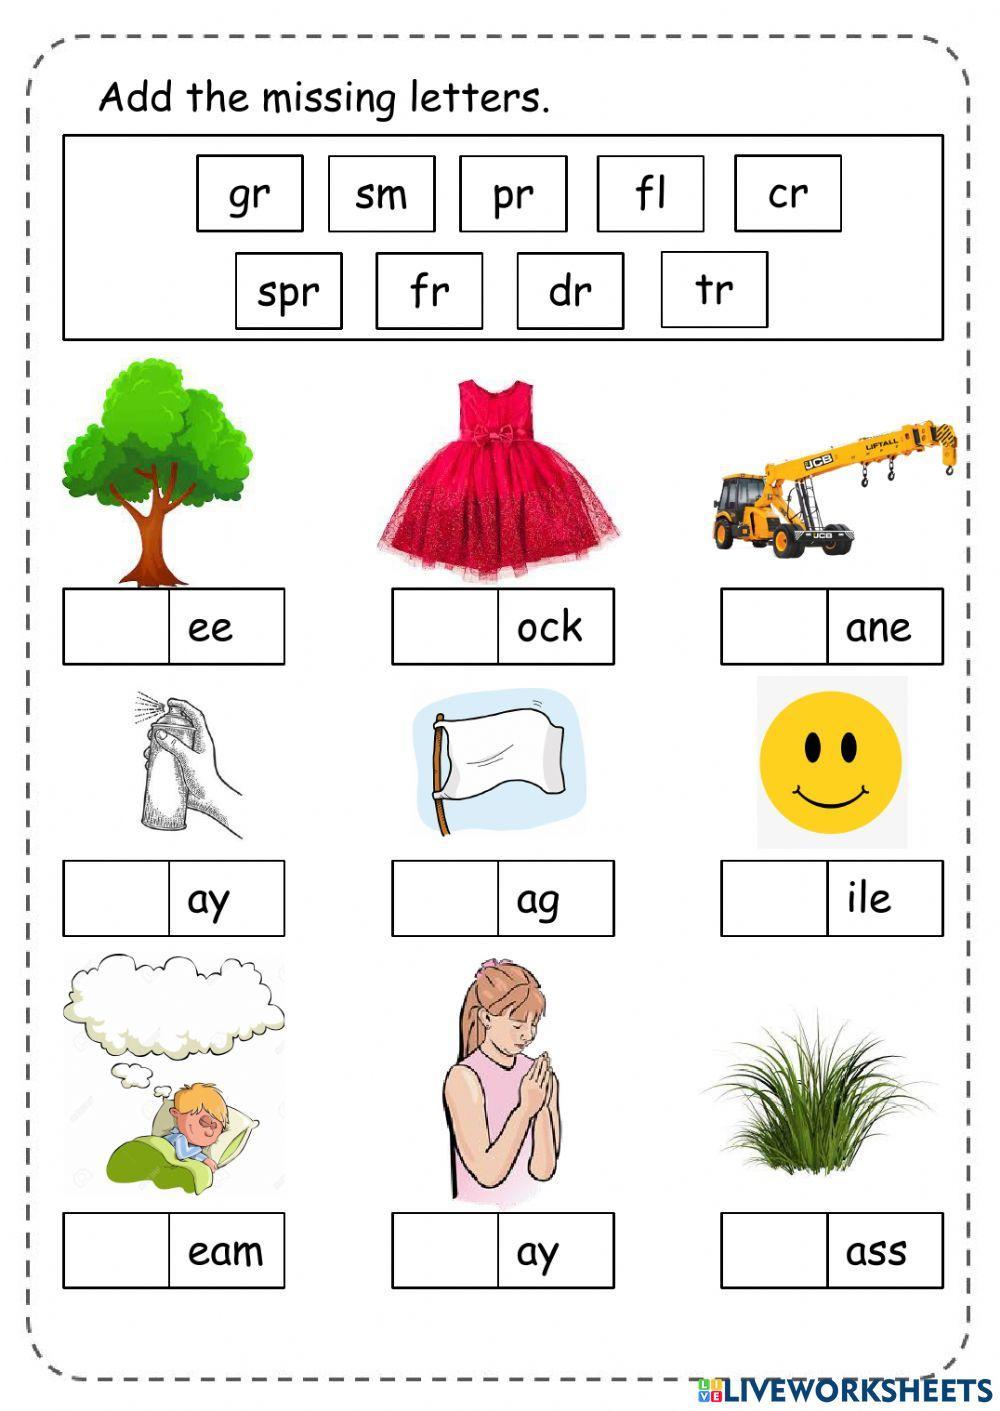 CVC words and blends